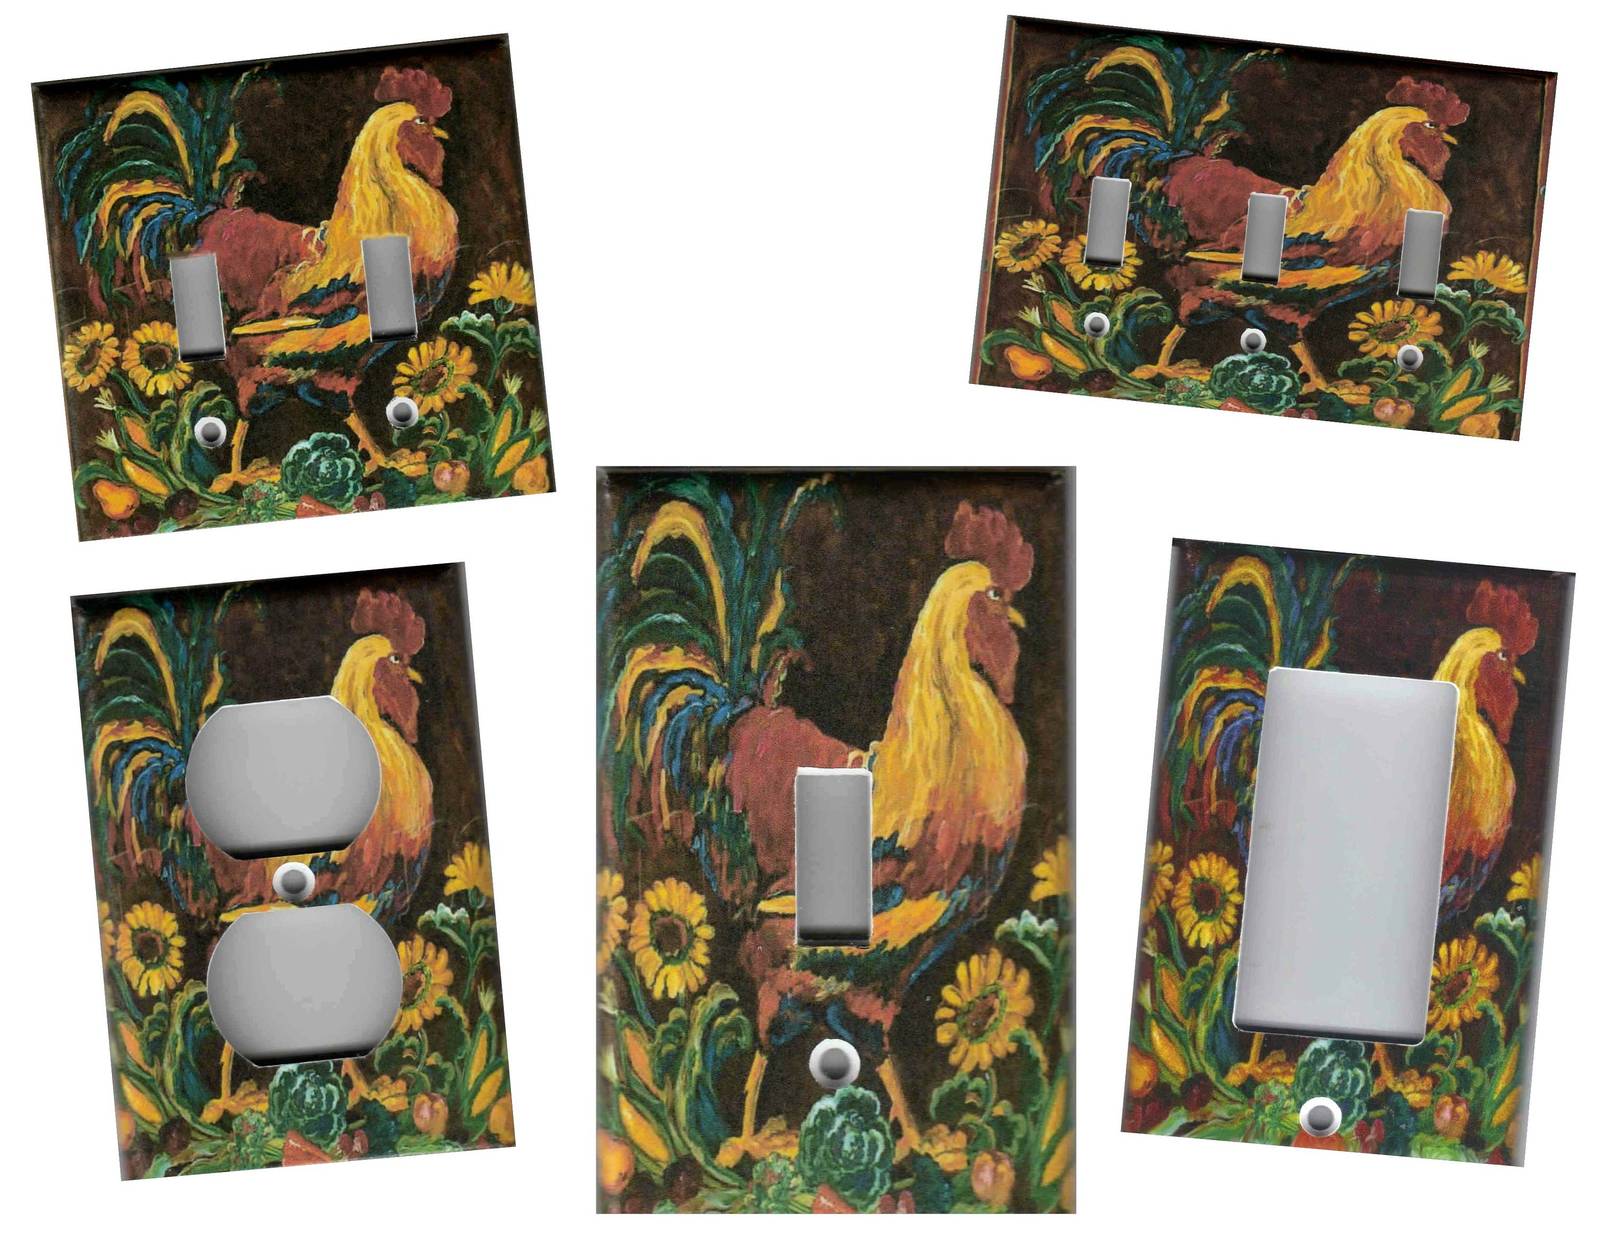 ROOSTER WITH SUNFLOWERS Kitchen Home Wall Decor Light Switch Plates and Outlets - $7.20 - $12.50